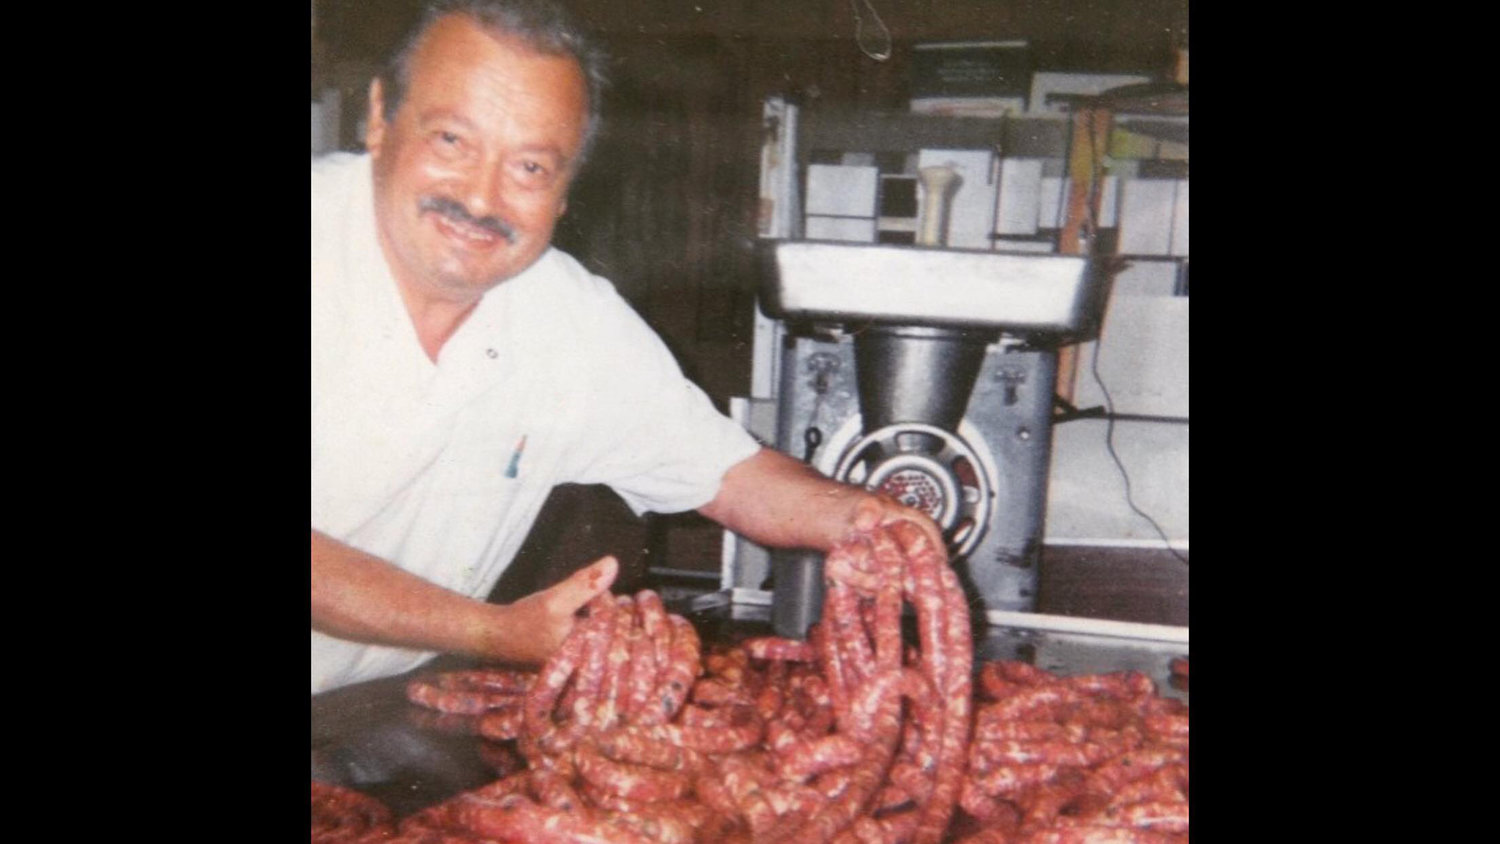 Tommaso Carlino founded T&F Pork Store in 1976. It was famous for its assorted Italian sausages, fresh mozzarella and sauce.